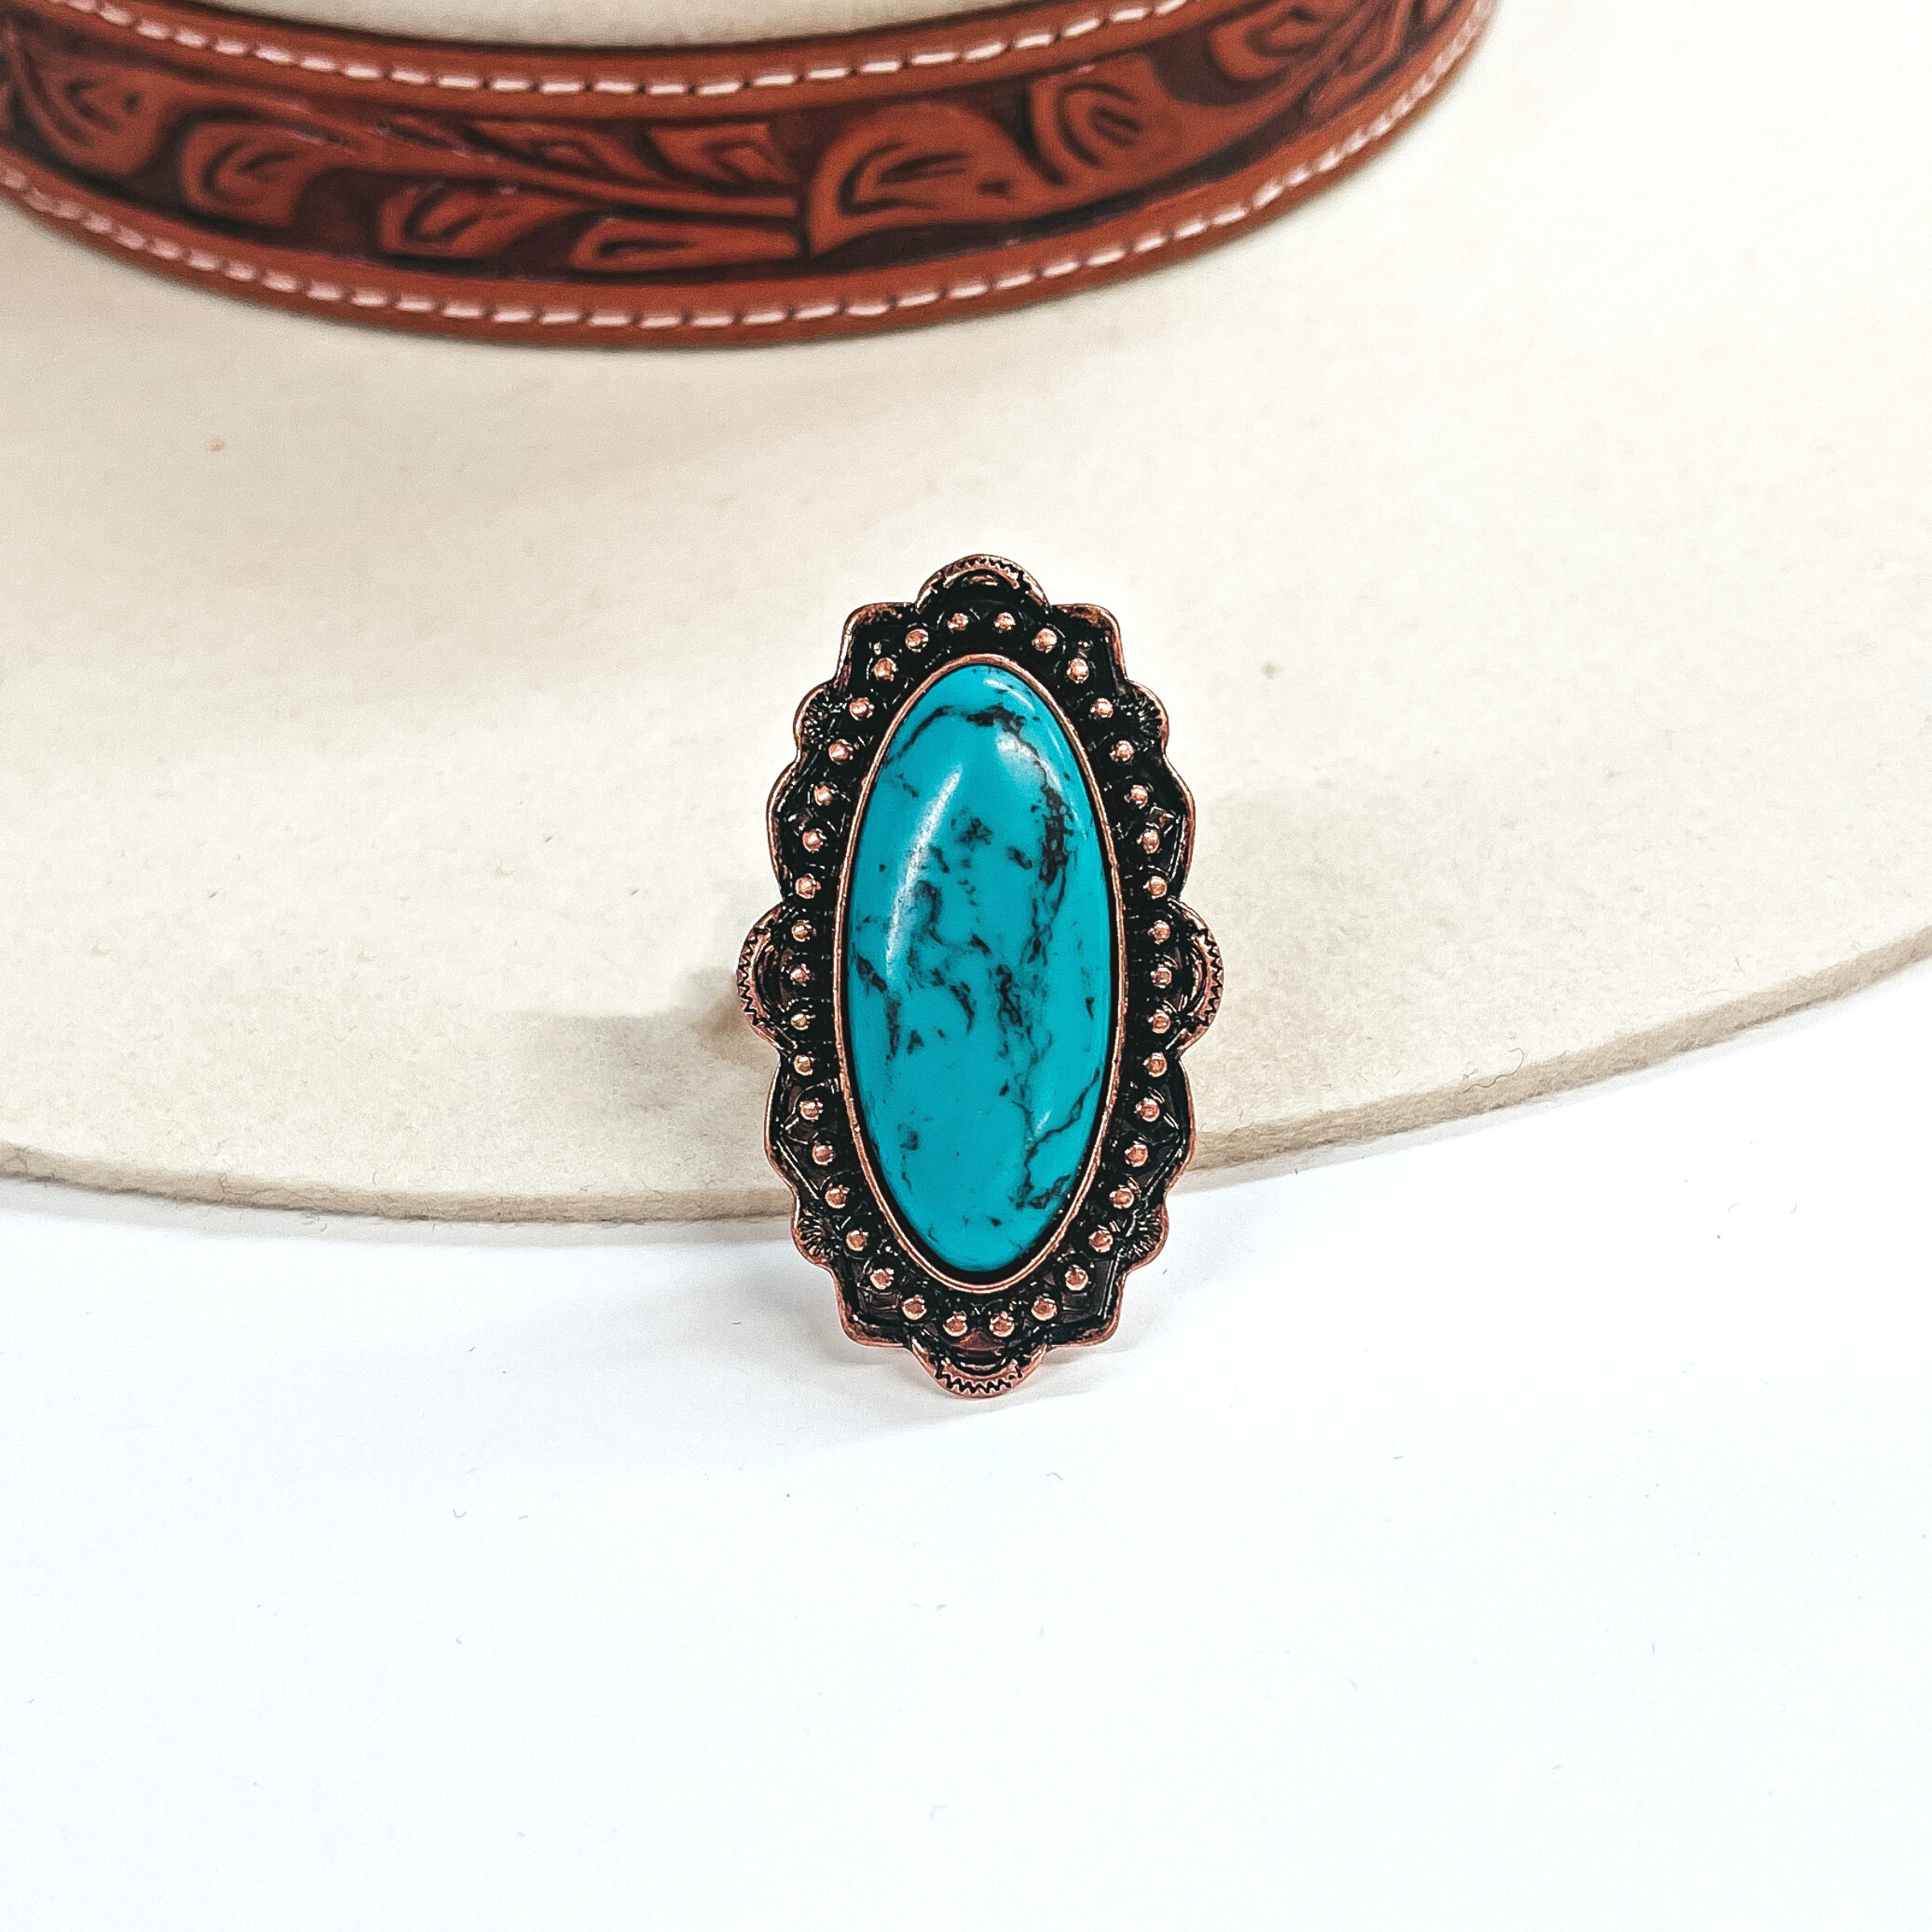 This is a long oval turquoise stone ring in a copper tone setting. The setting has  rounded bumps with small detailing all around. This ring is taken on an ivory felt hat  with a brown textured band and on a white background.